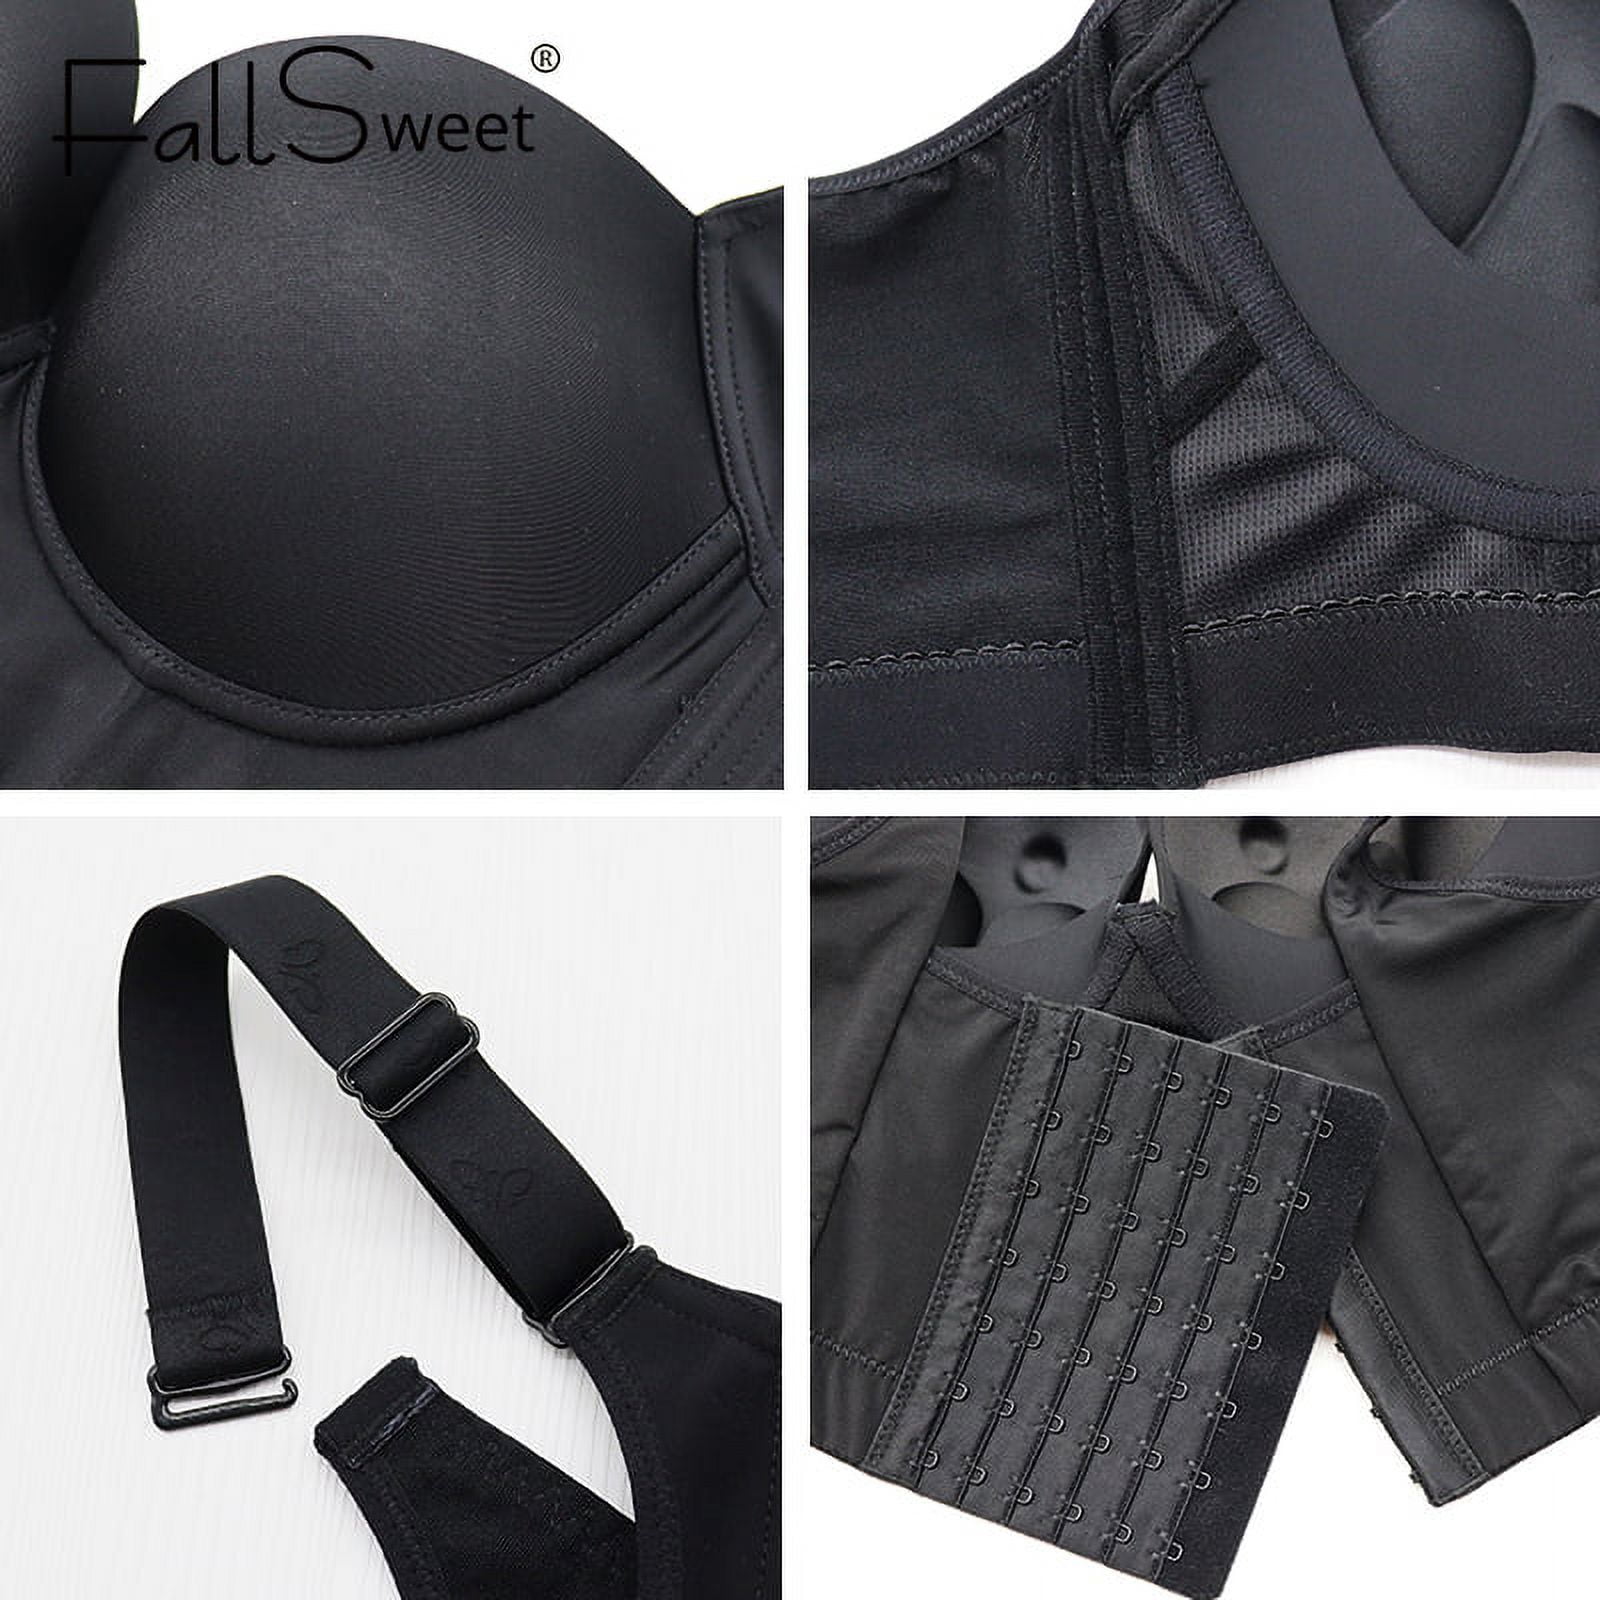 FallSweet Plus Size Bras Women Hide Back Fat Underwear Shpaer Incorporated  Full Back Coverage Deep Cup Sexy Push Up Bra Lingrie 22280q From 26,55 €